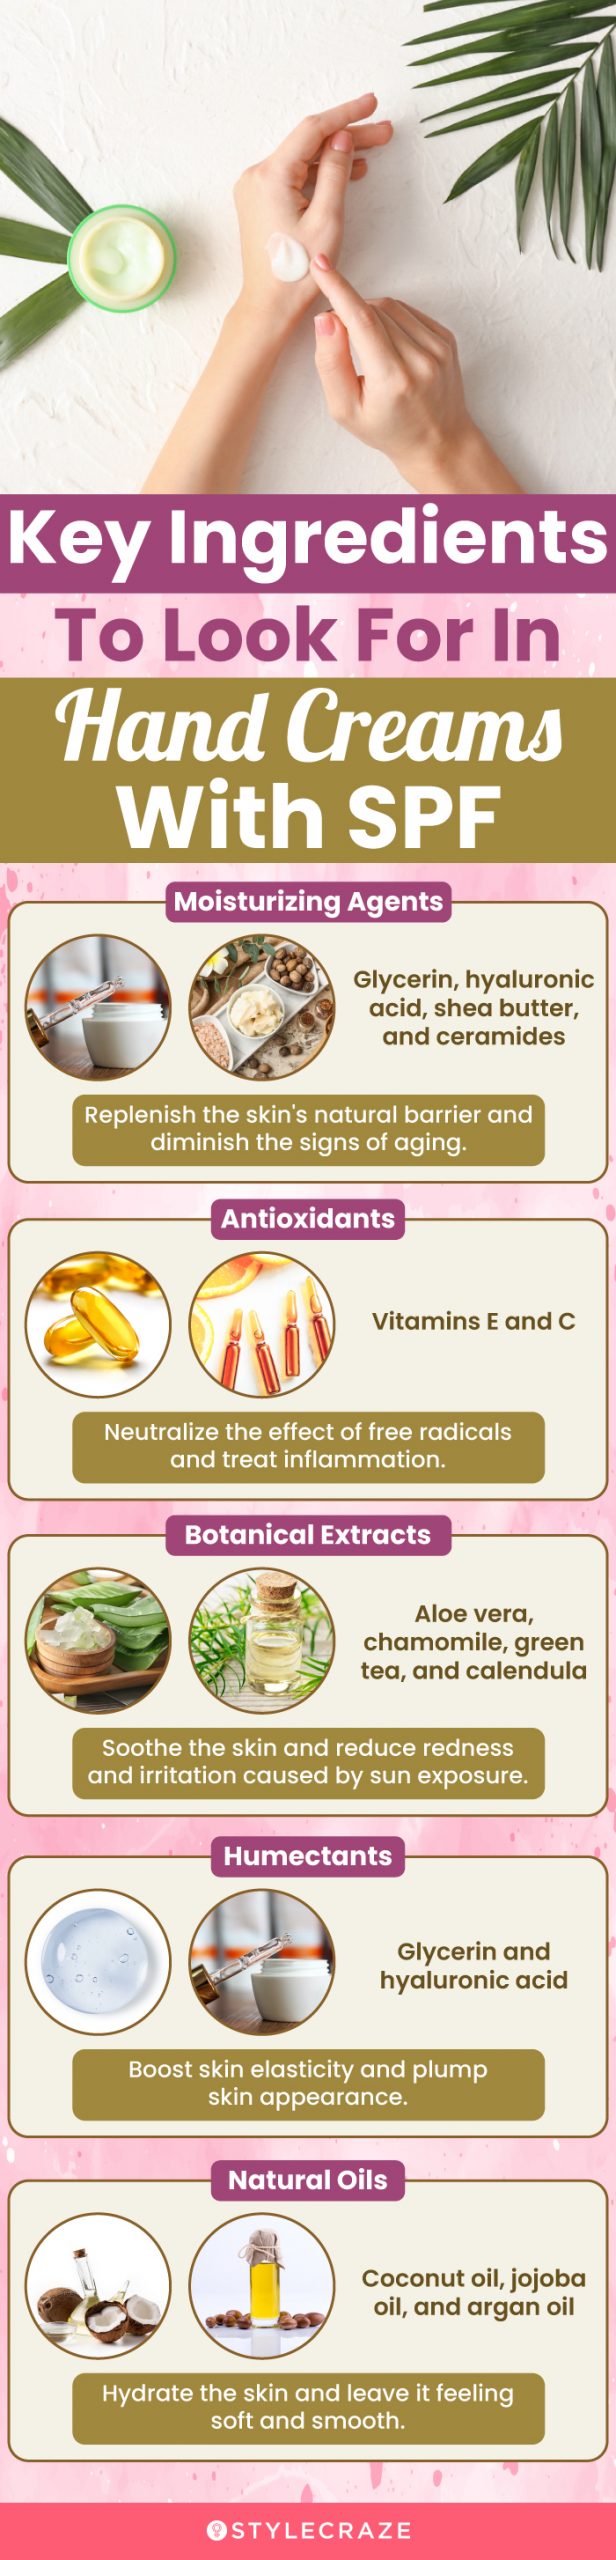 Key Ingredients To Look For In Hand Creams With SPF (infographic)